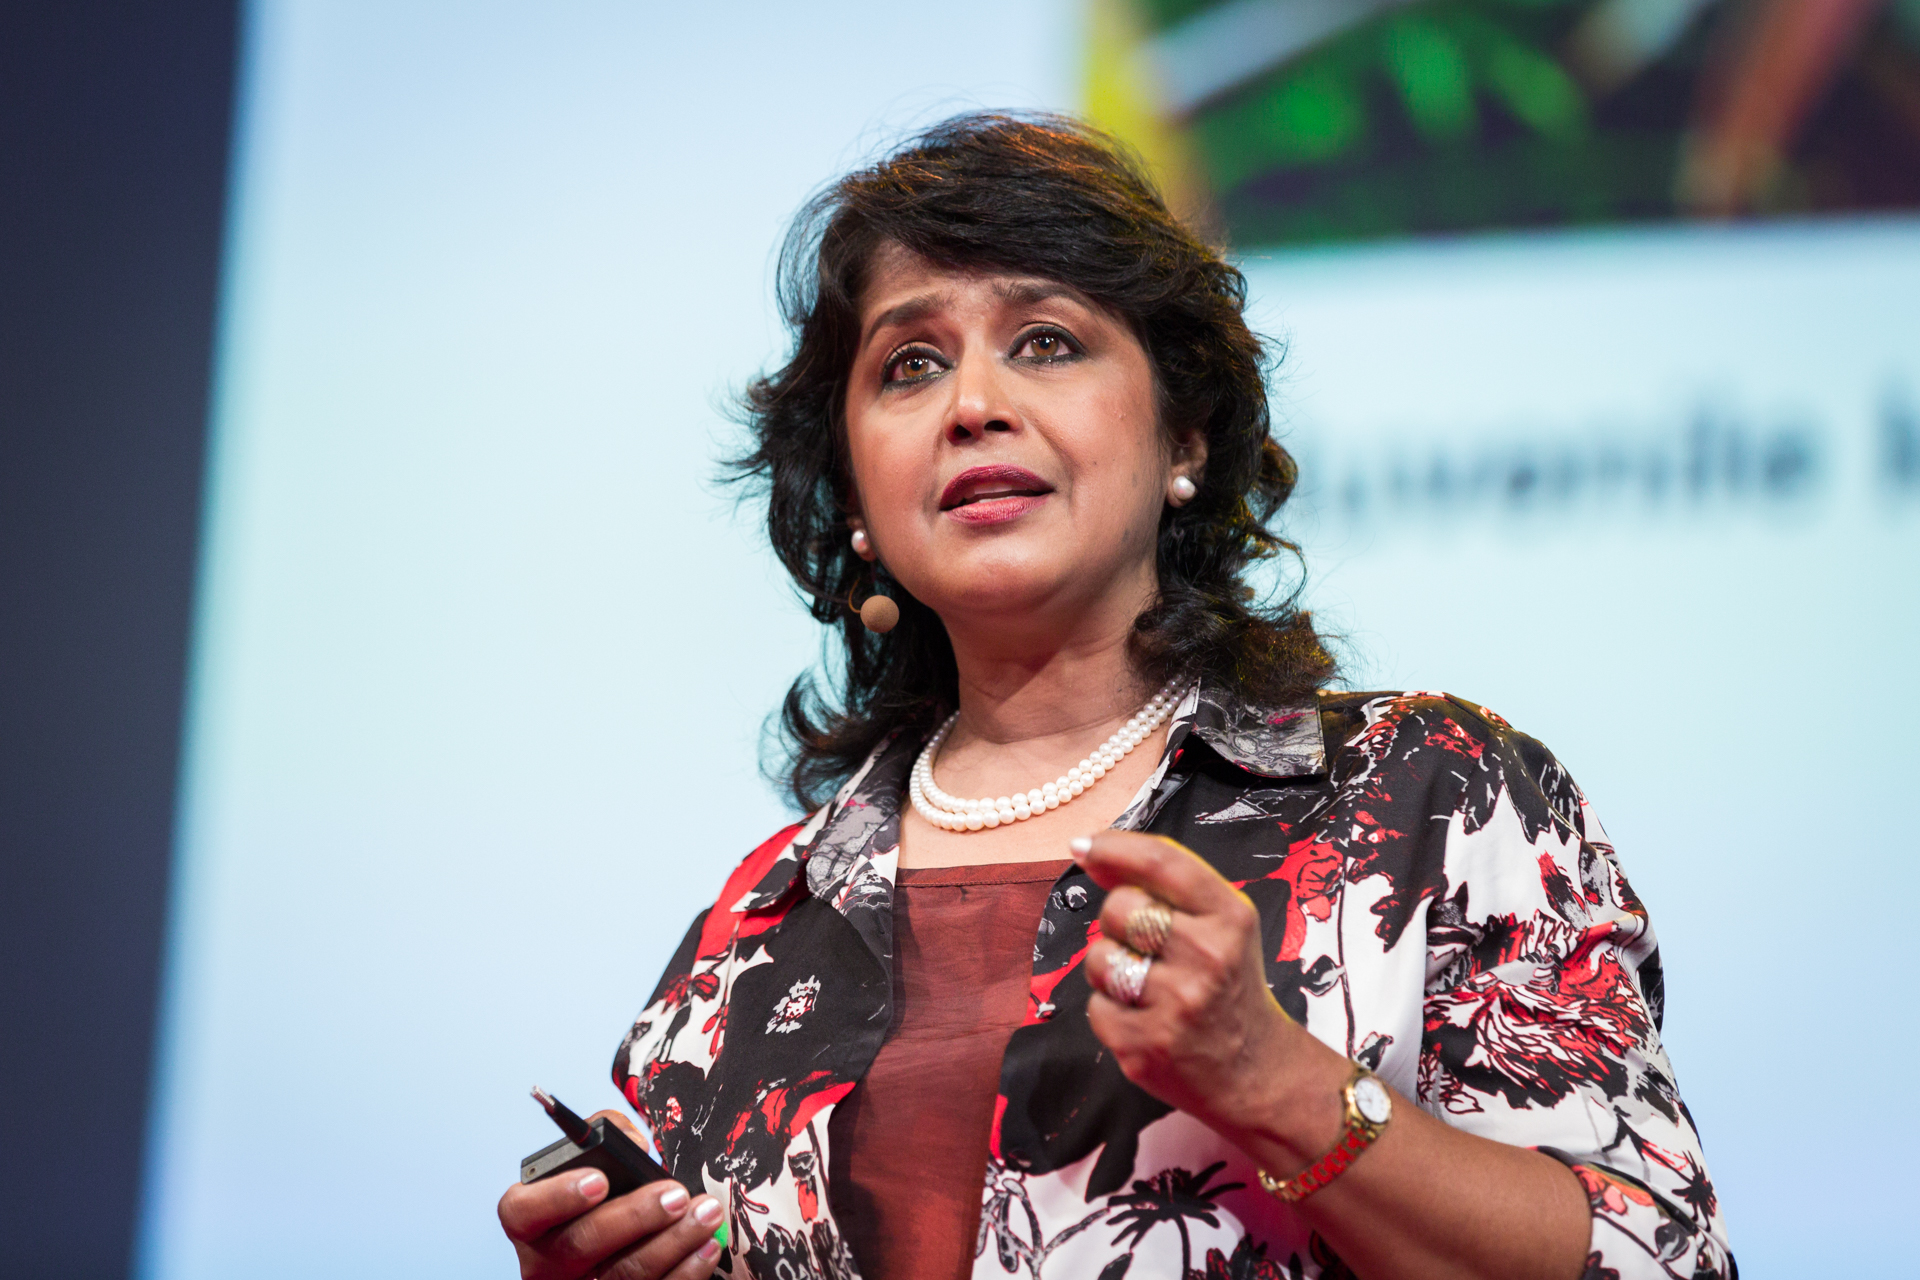 Surprise! You’re the president: A conversation with the first female
president of Mauritius